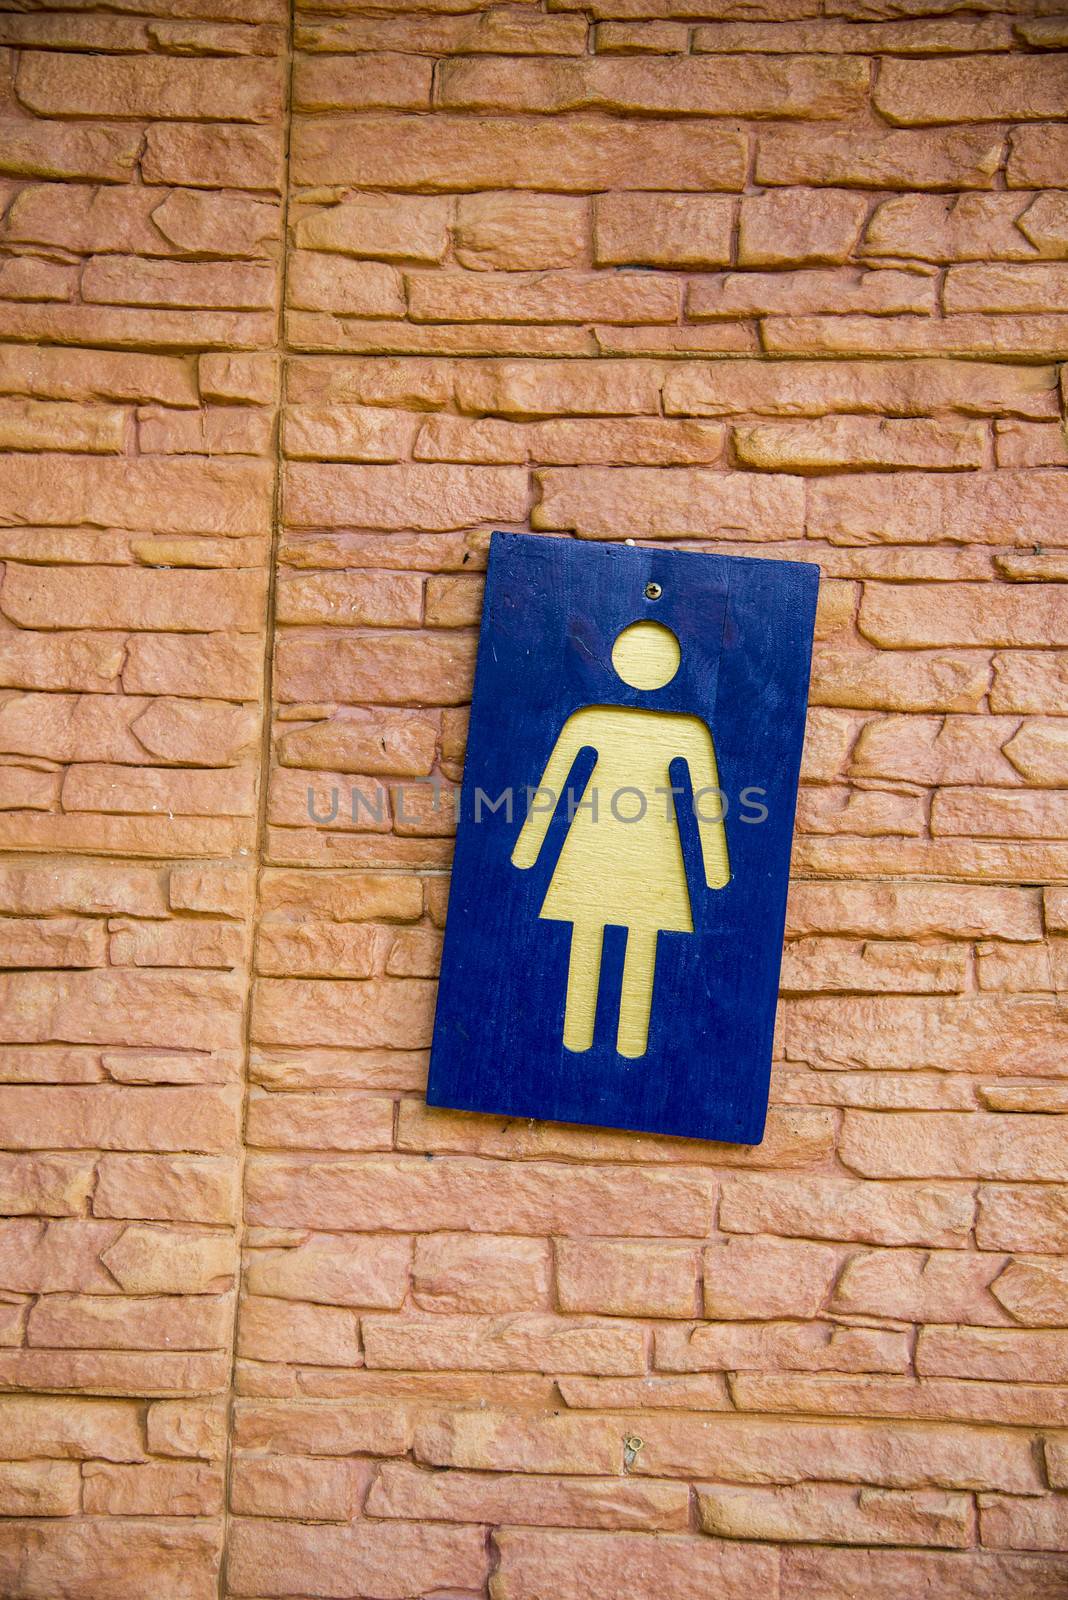 Lady toilet sign on the wall1